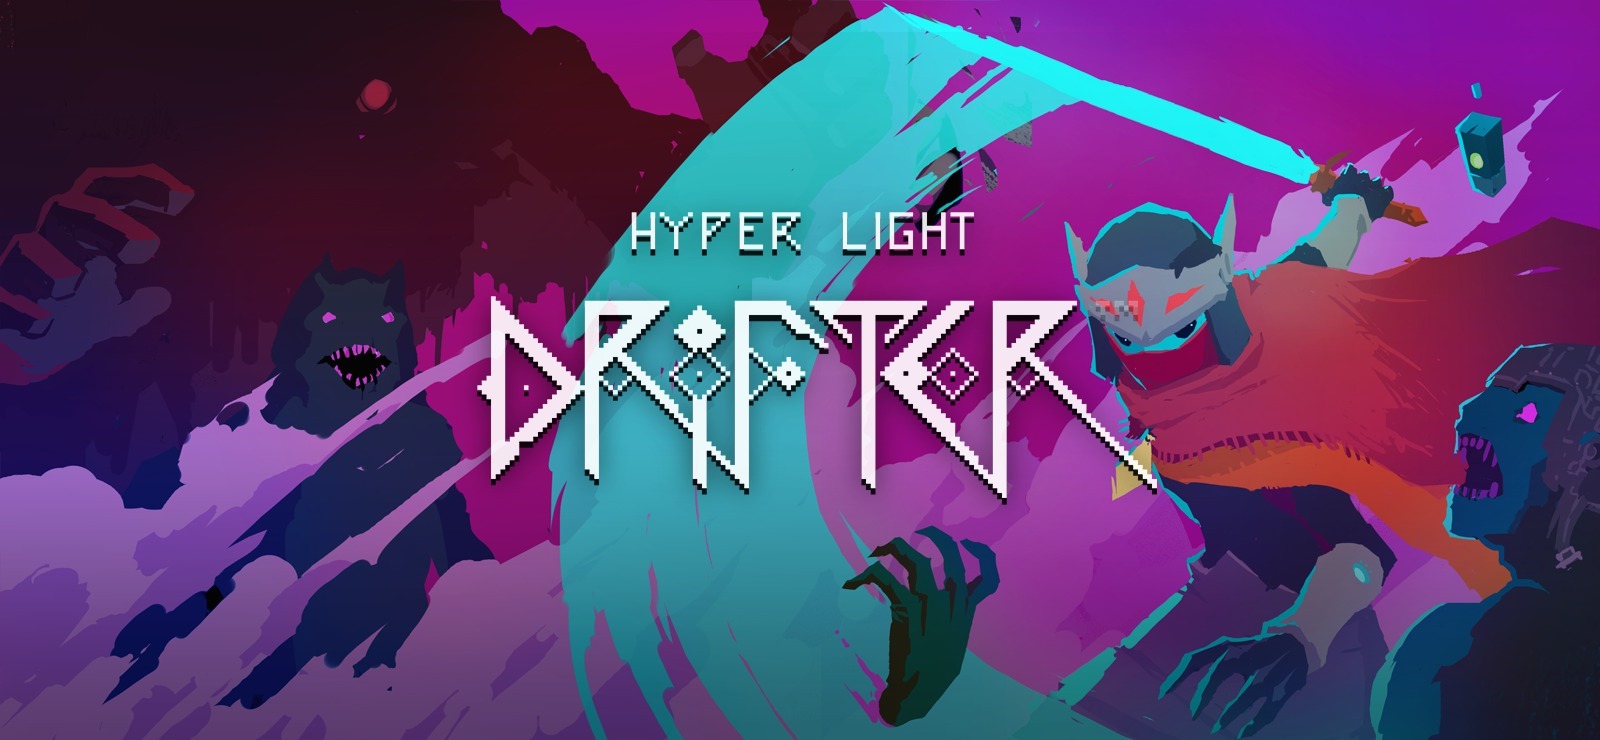 Hyper Light Heads To Nintendo Switch In 2018 - Siliconera